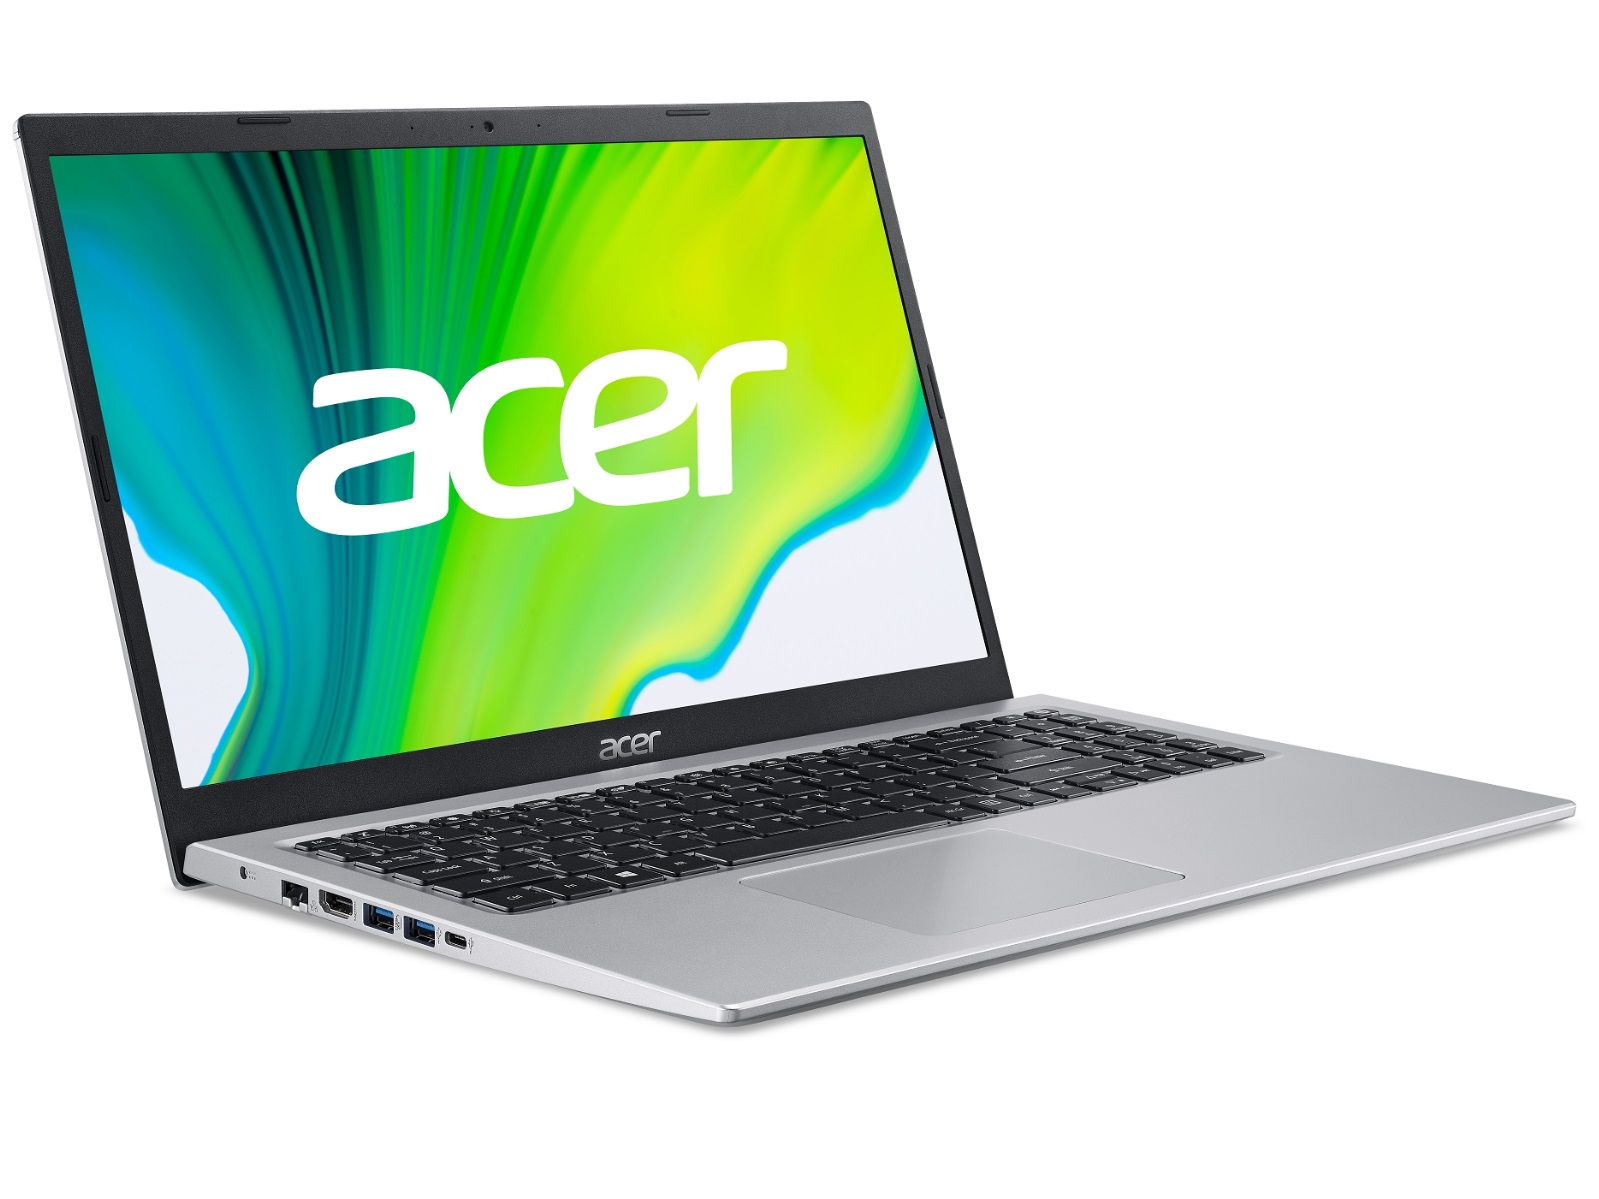 The Ultimate Value King The Acer Aspire 5